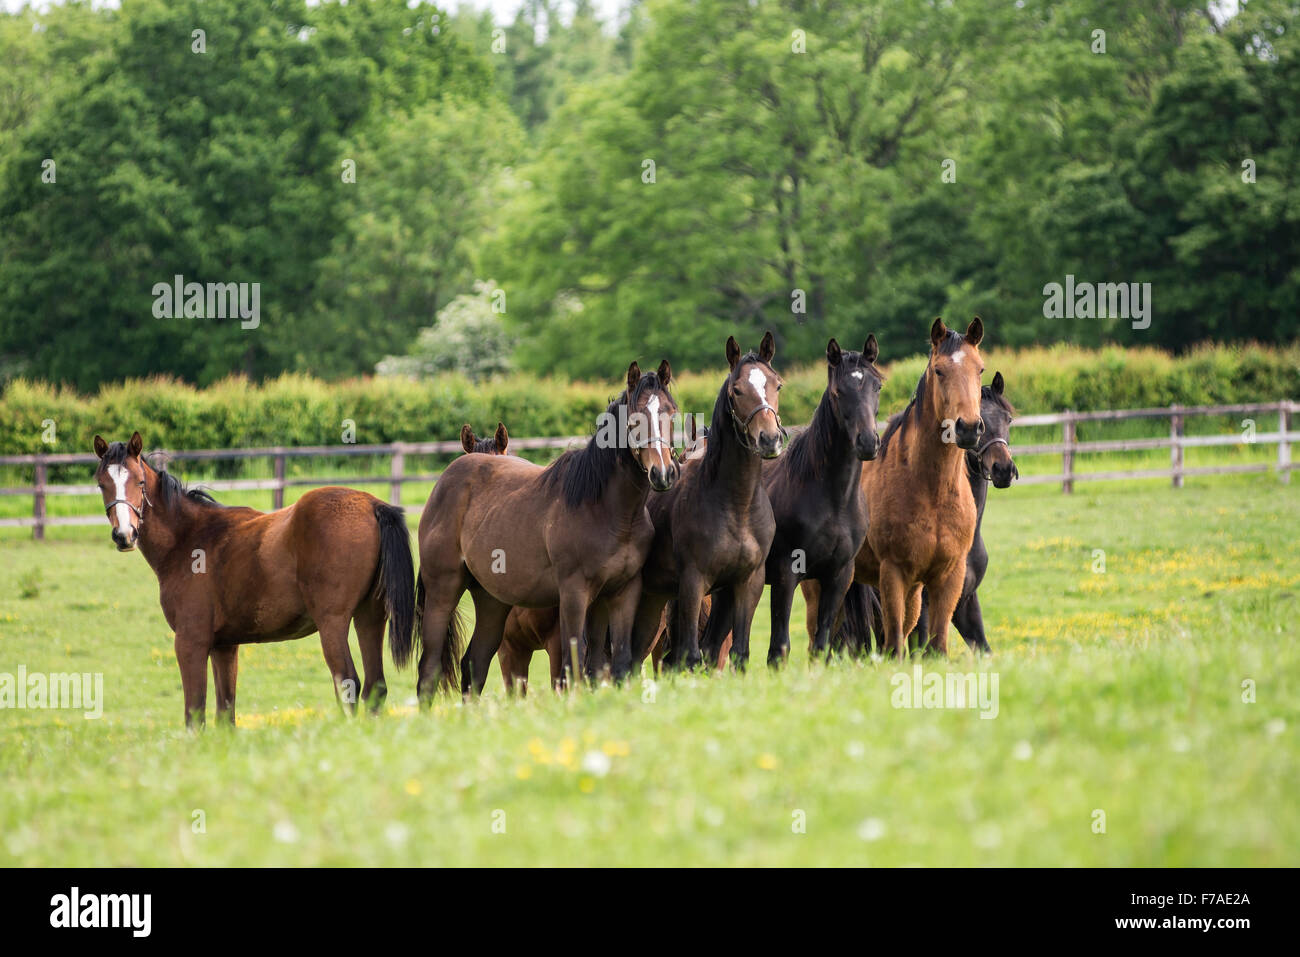 Herd of young English thoroughbred horses in a field Stock Photo